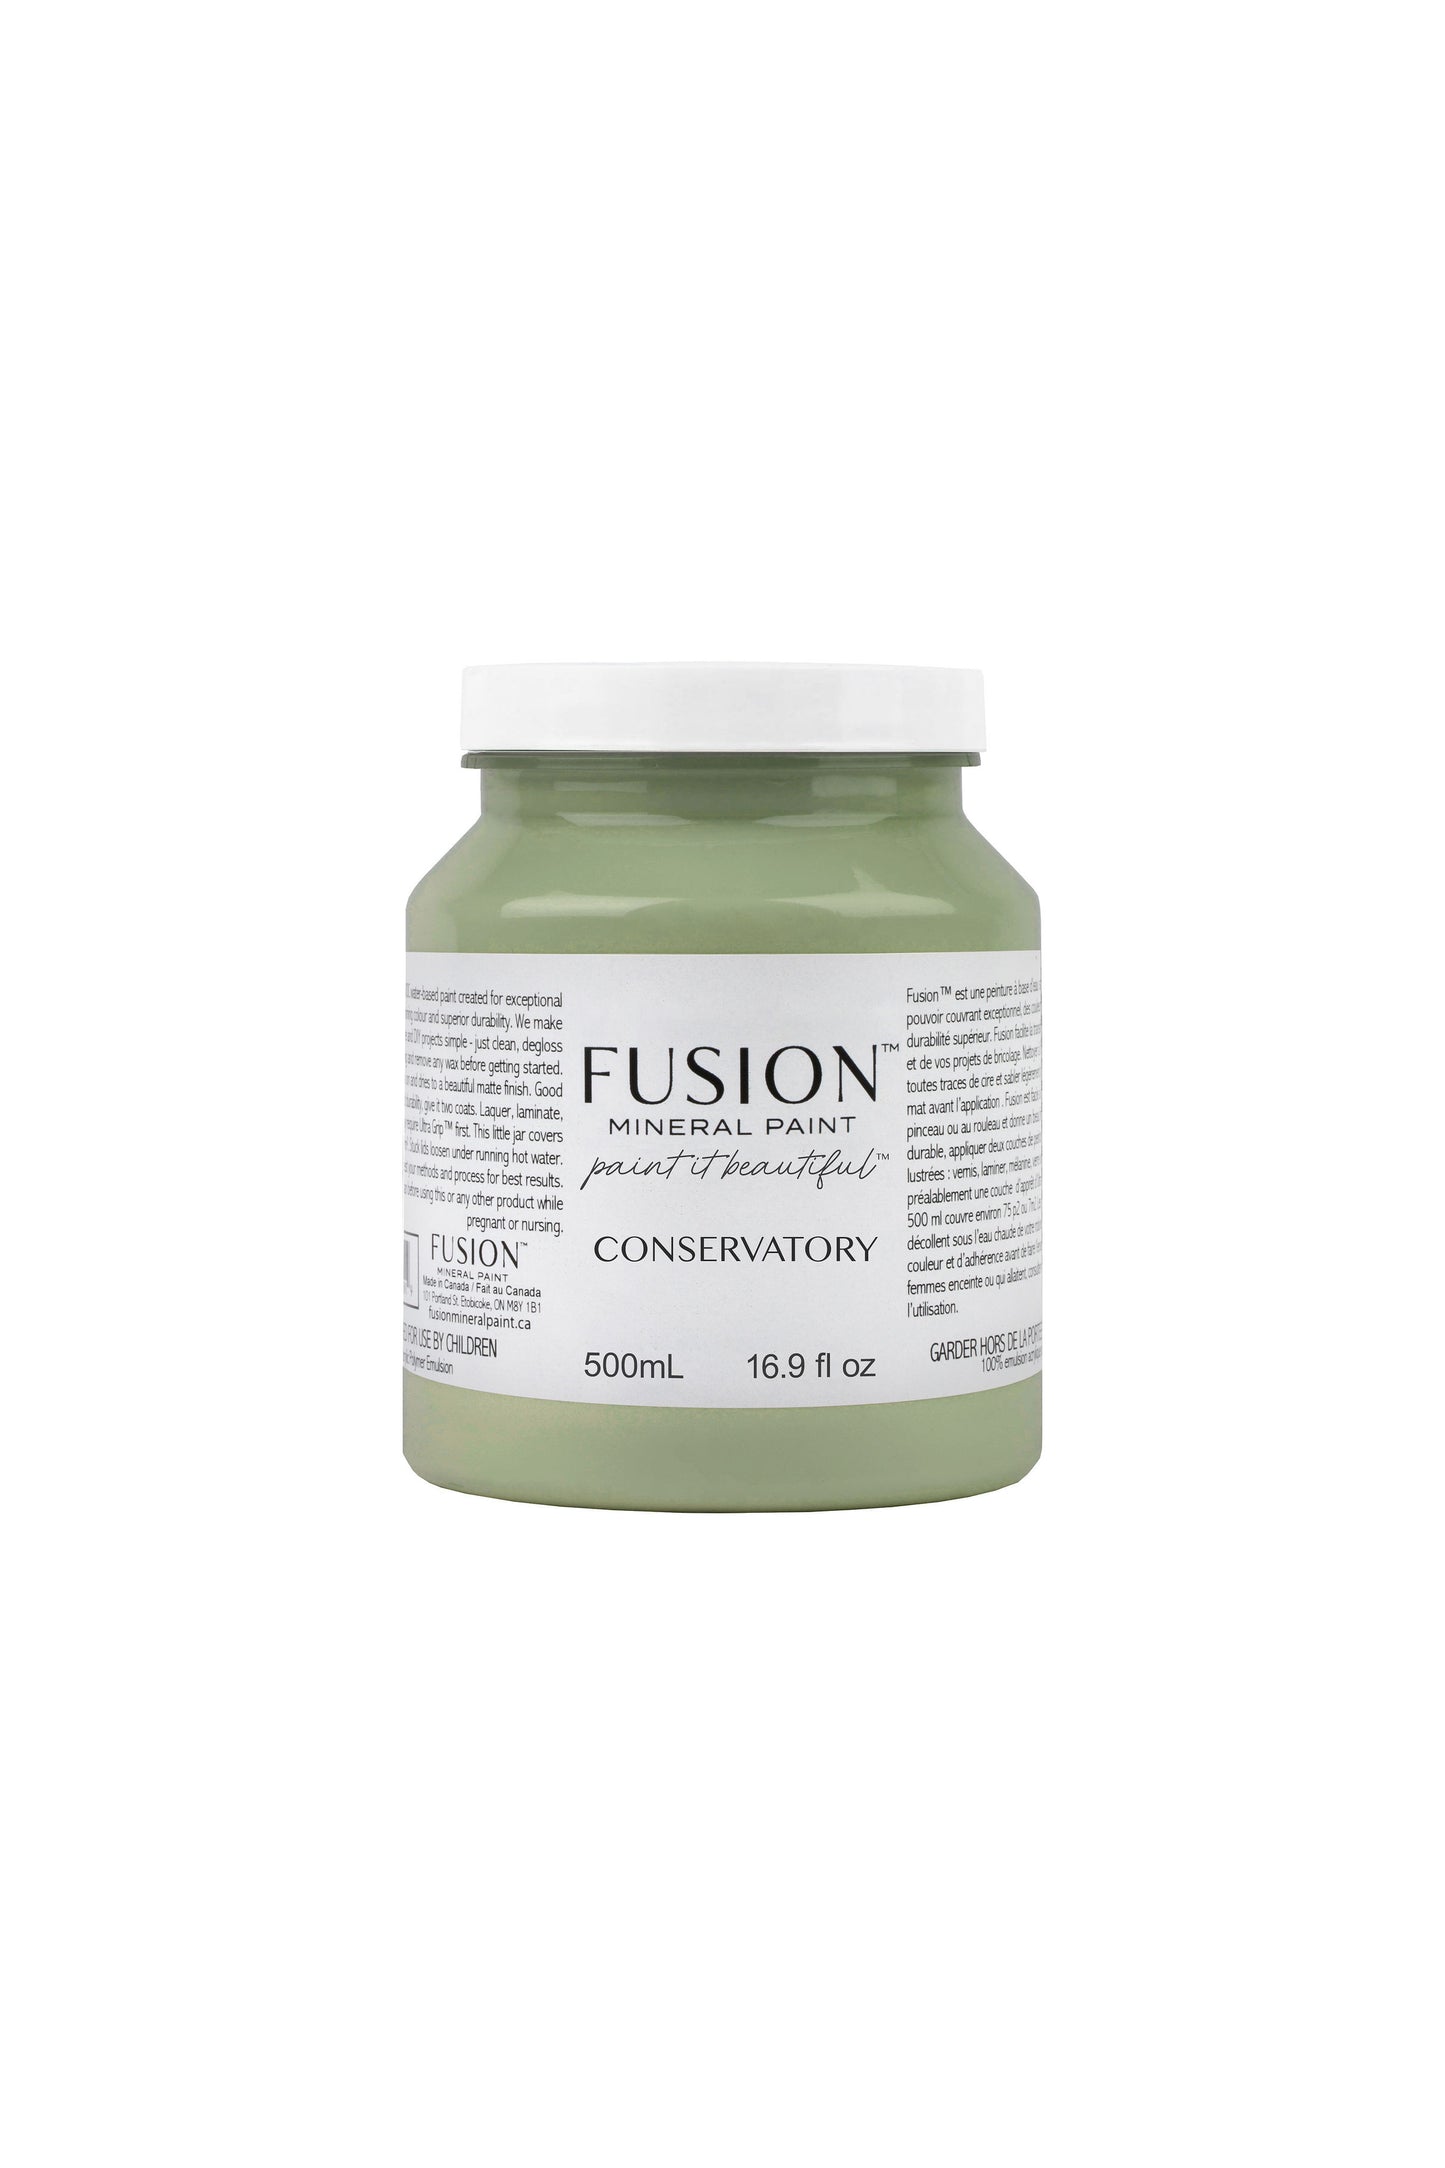 FUSION MINERAL PAINT- Conservatory